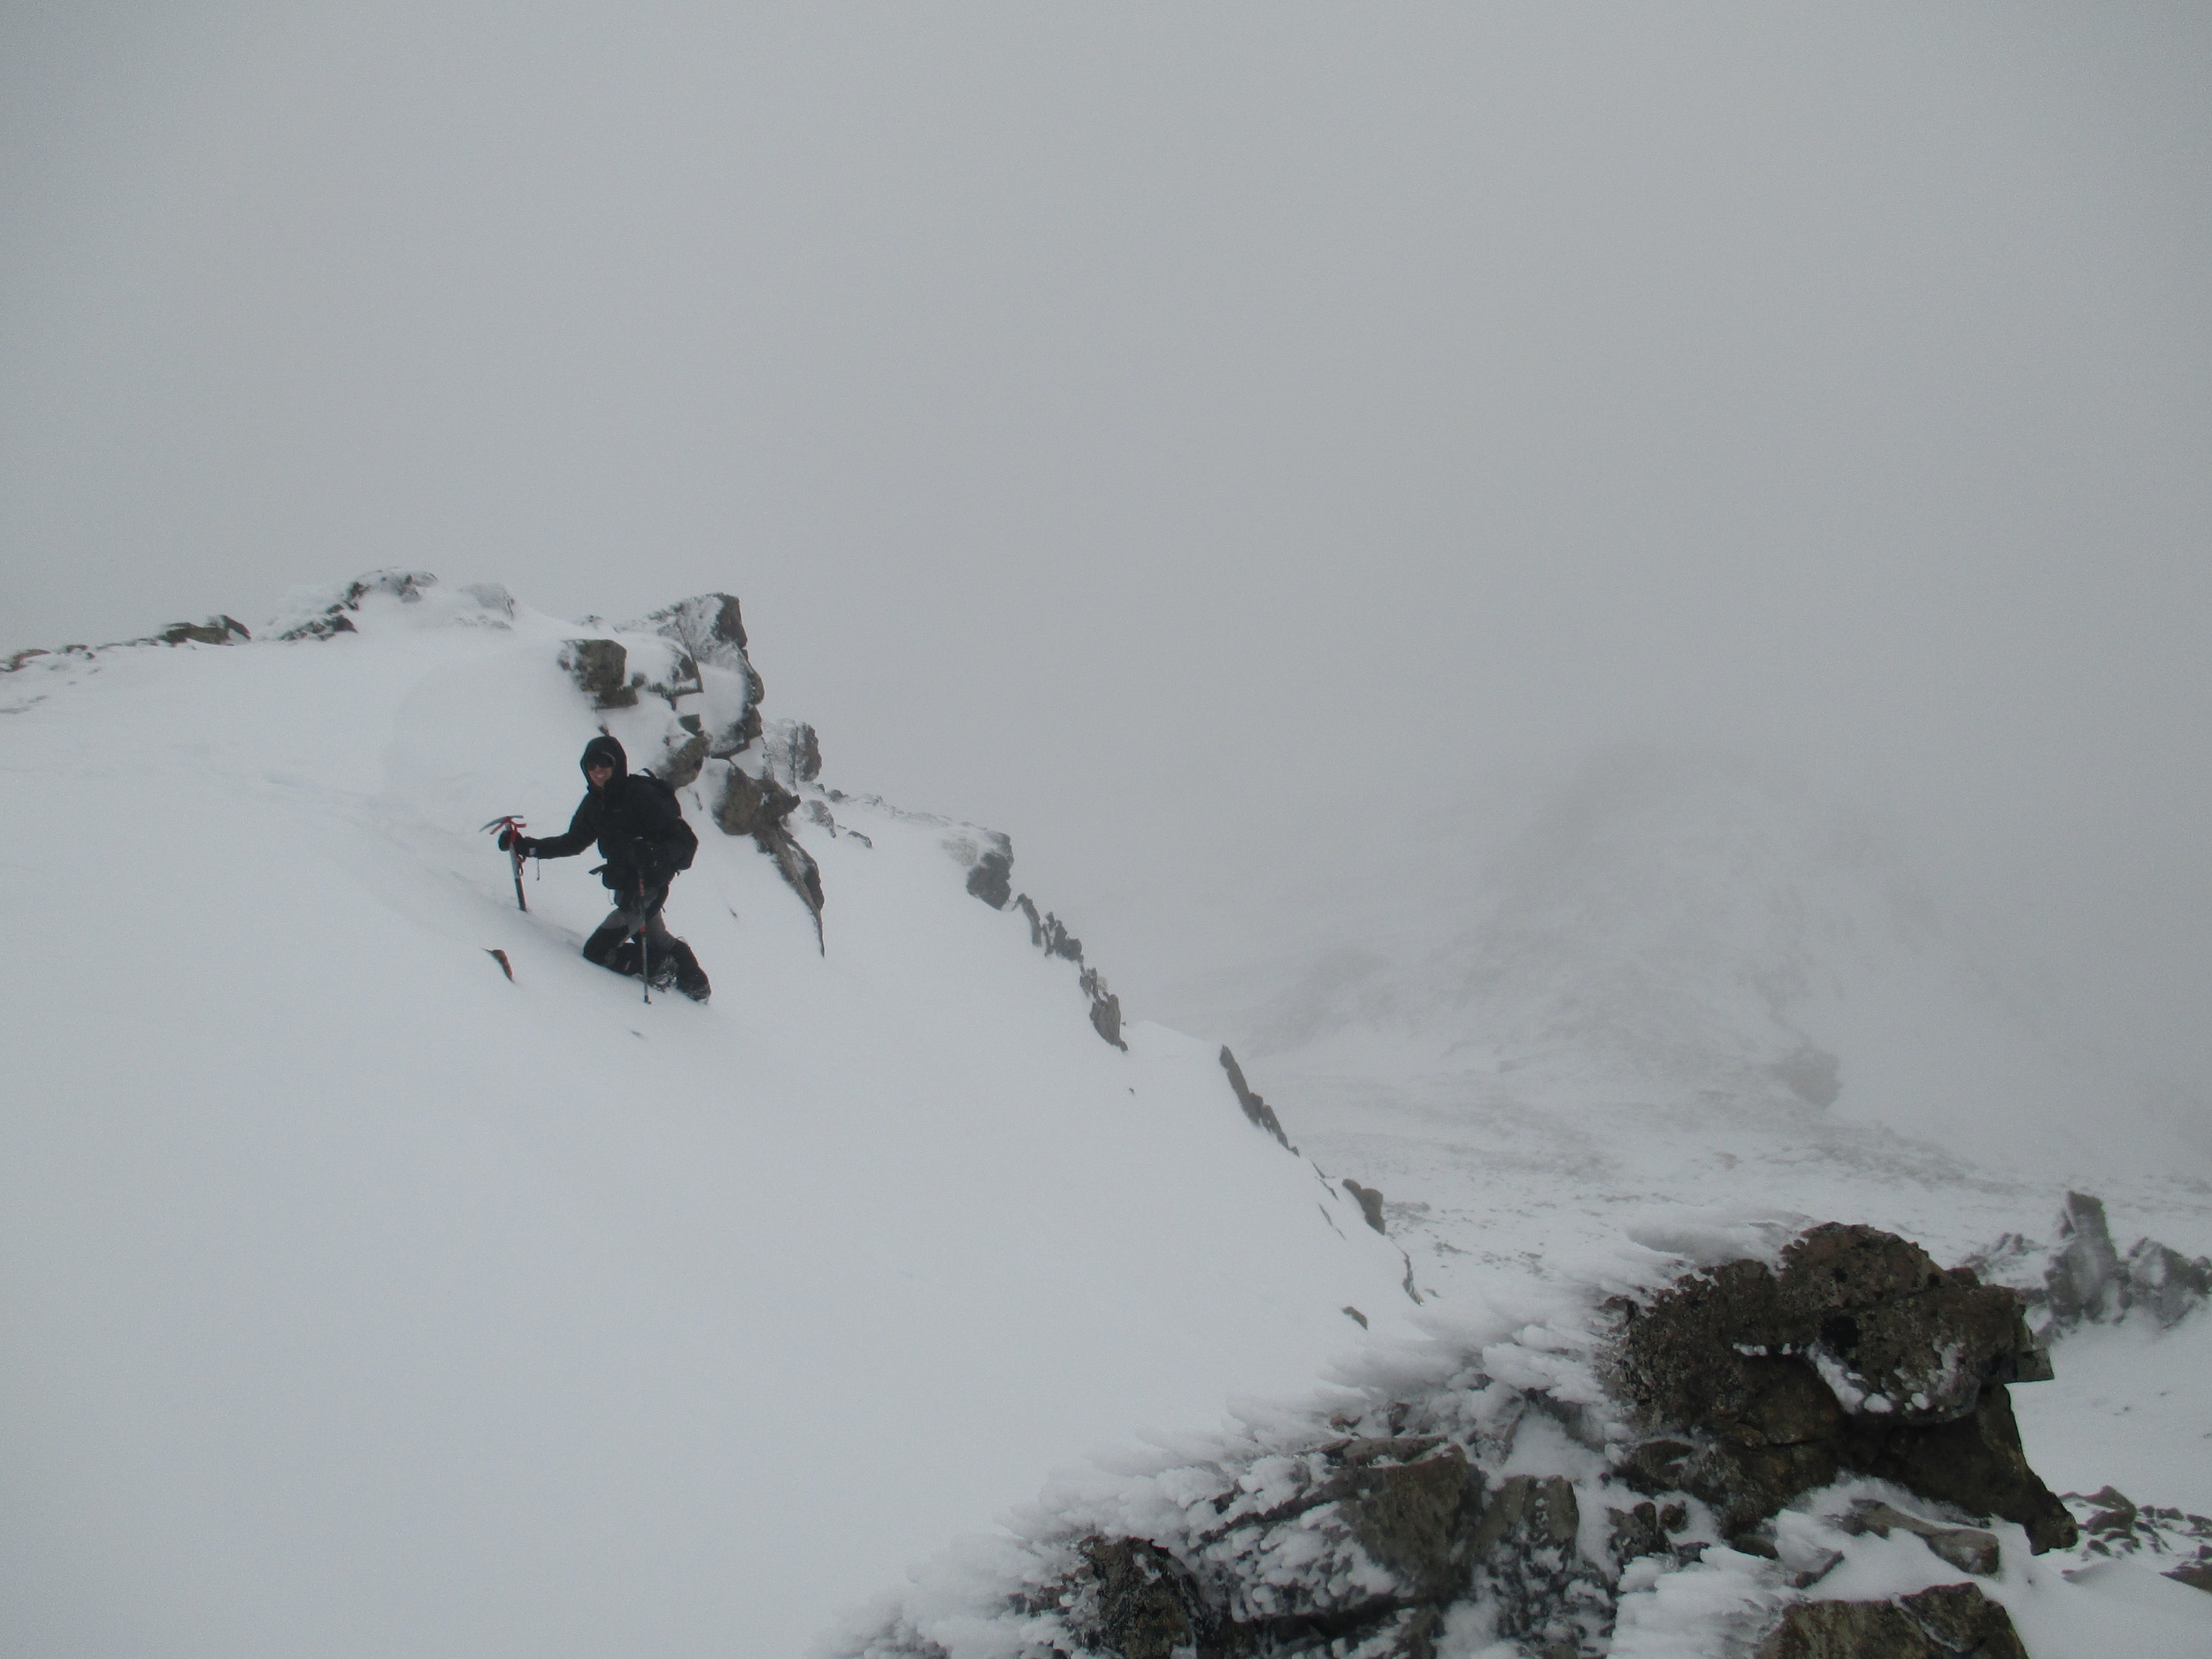   Climbing the West face of Mount Angelus with Sergio just before the storm ,winter 2015  